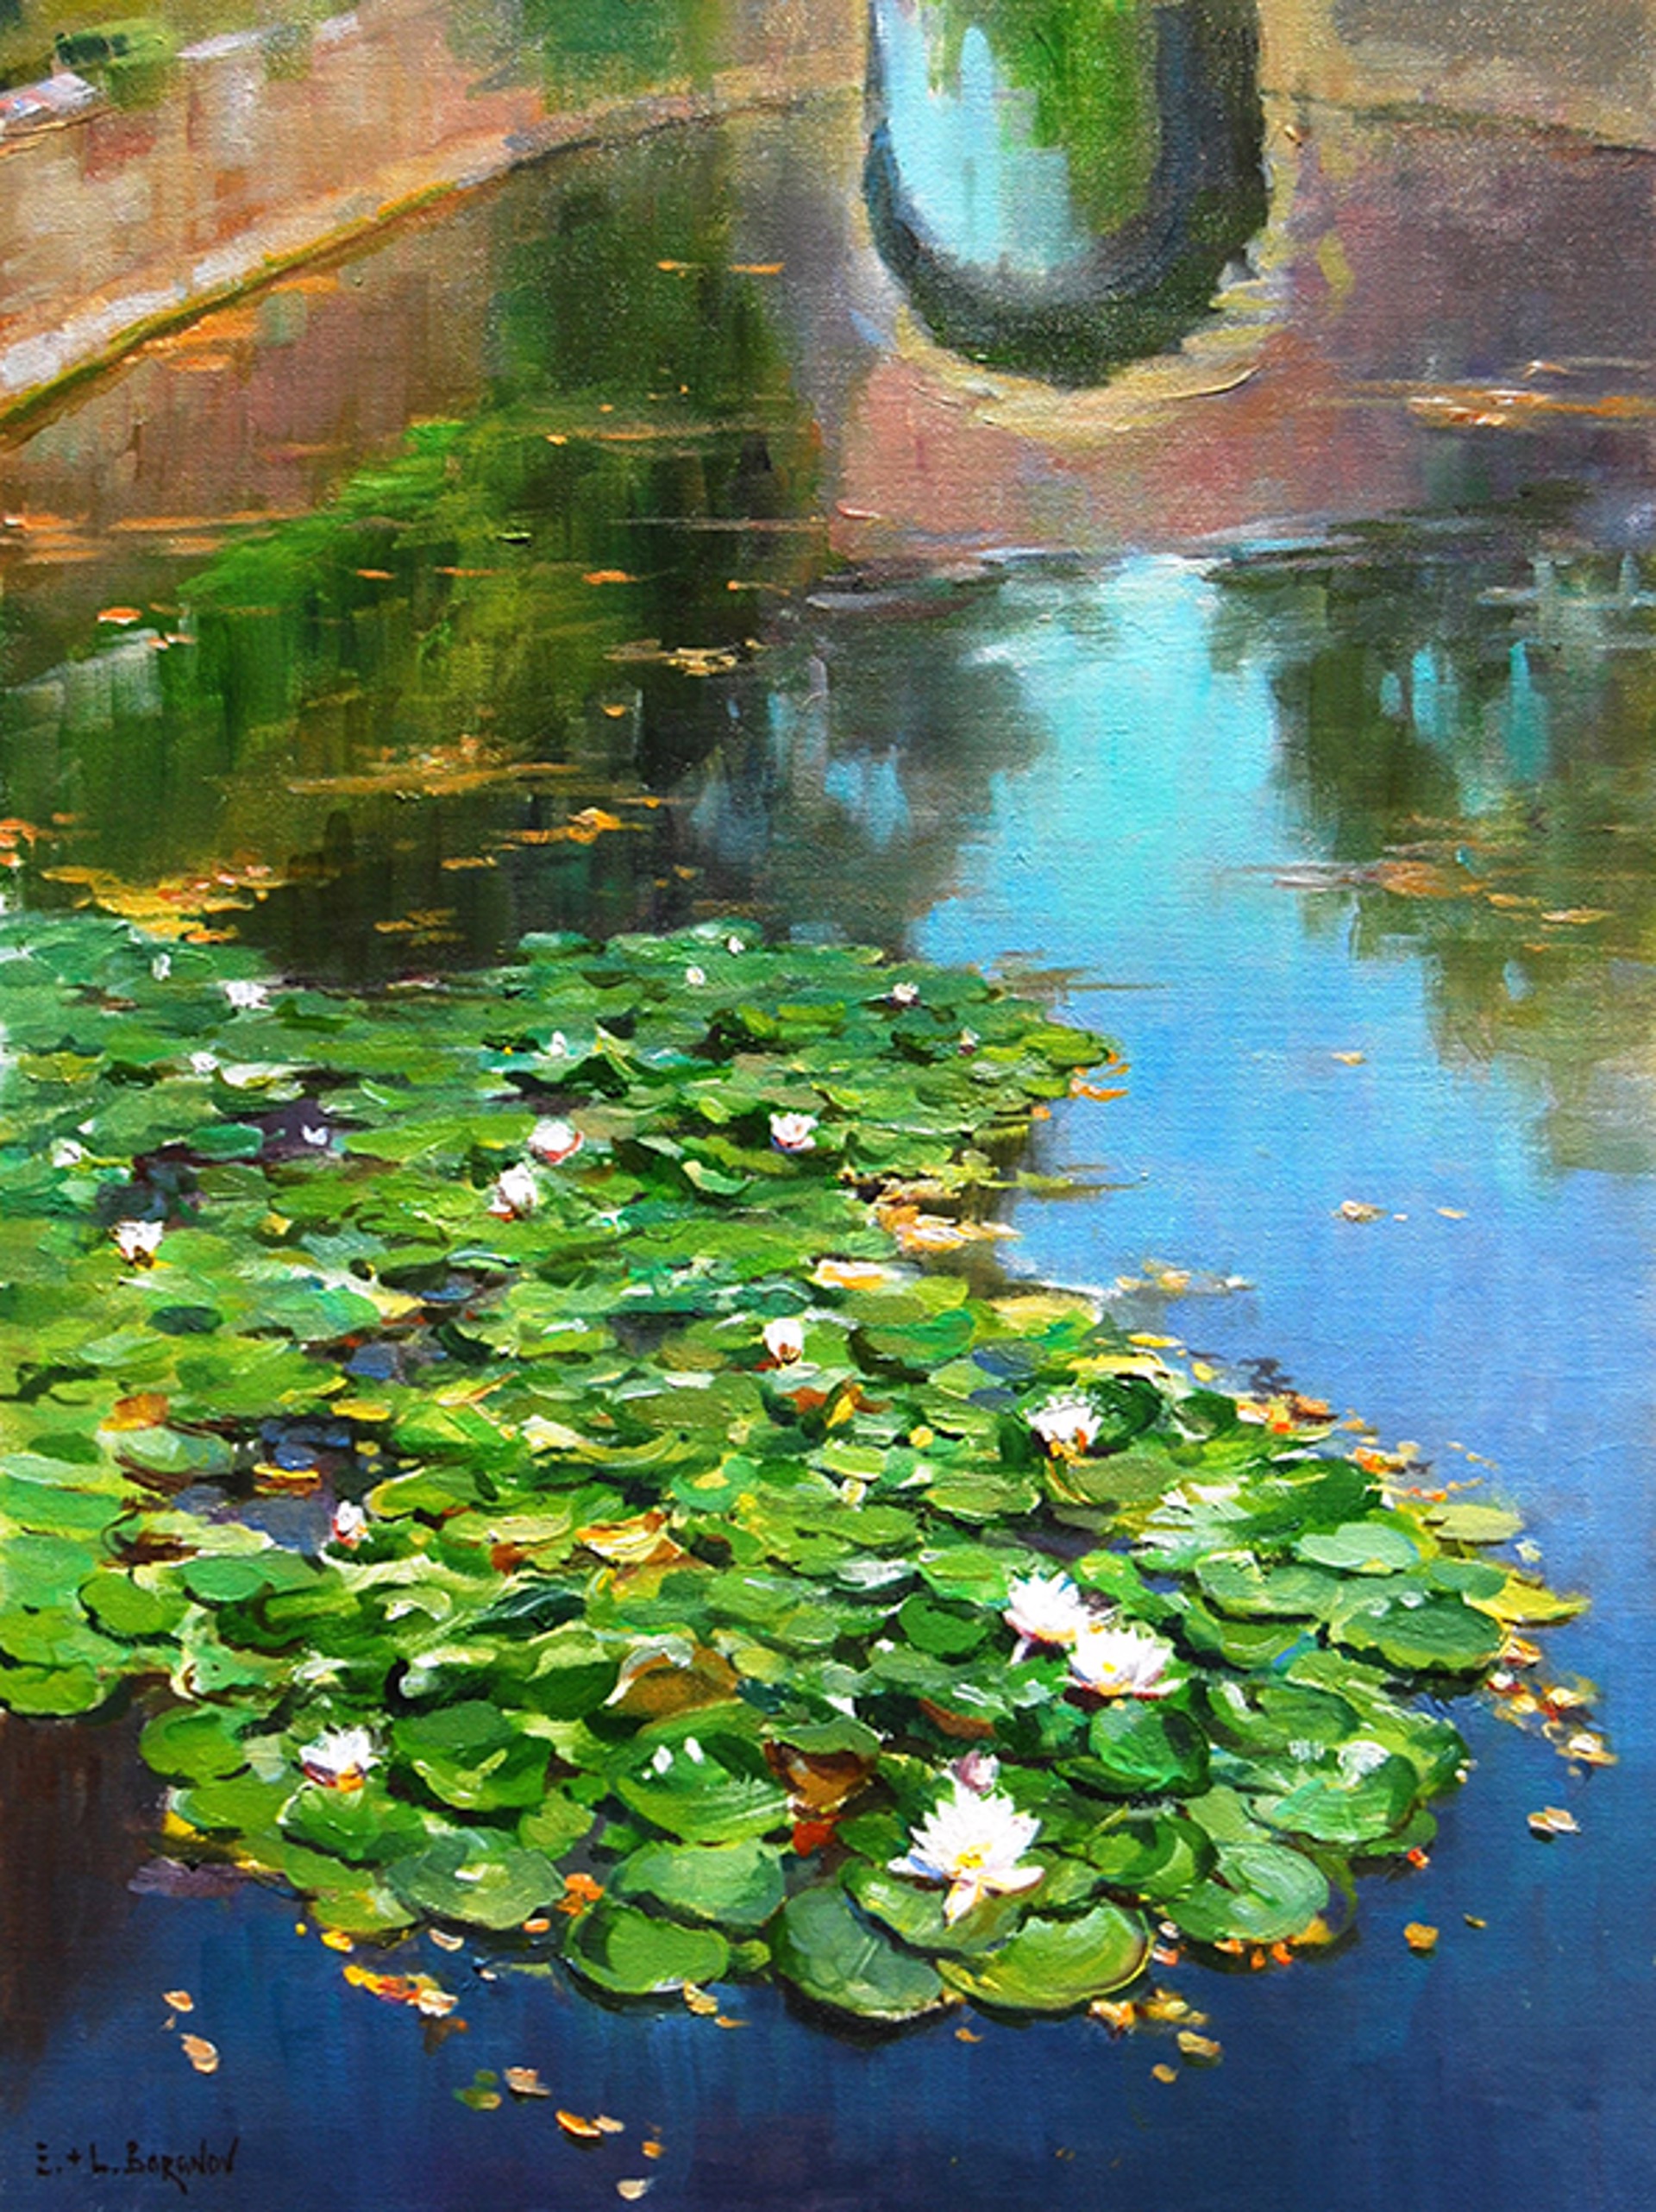 Water Lilies By Kippebruggetje by Evgeny & Lydia Baranov